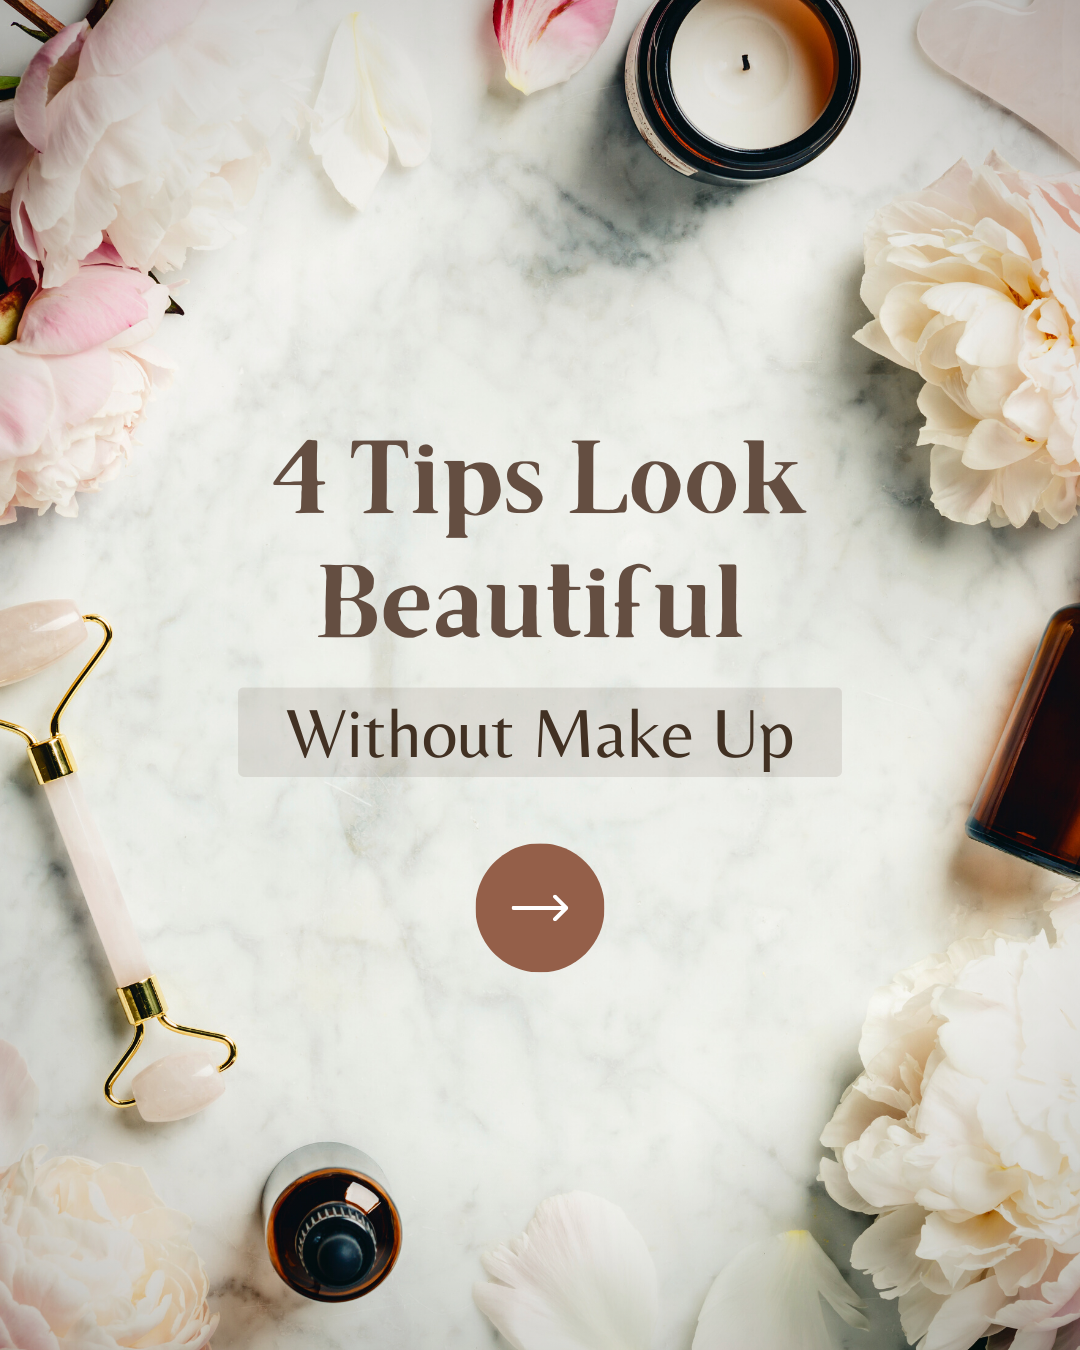 4 natural beauty tips to radiate without relying on makeup! 💦🌿🫧✨🦋